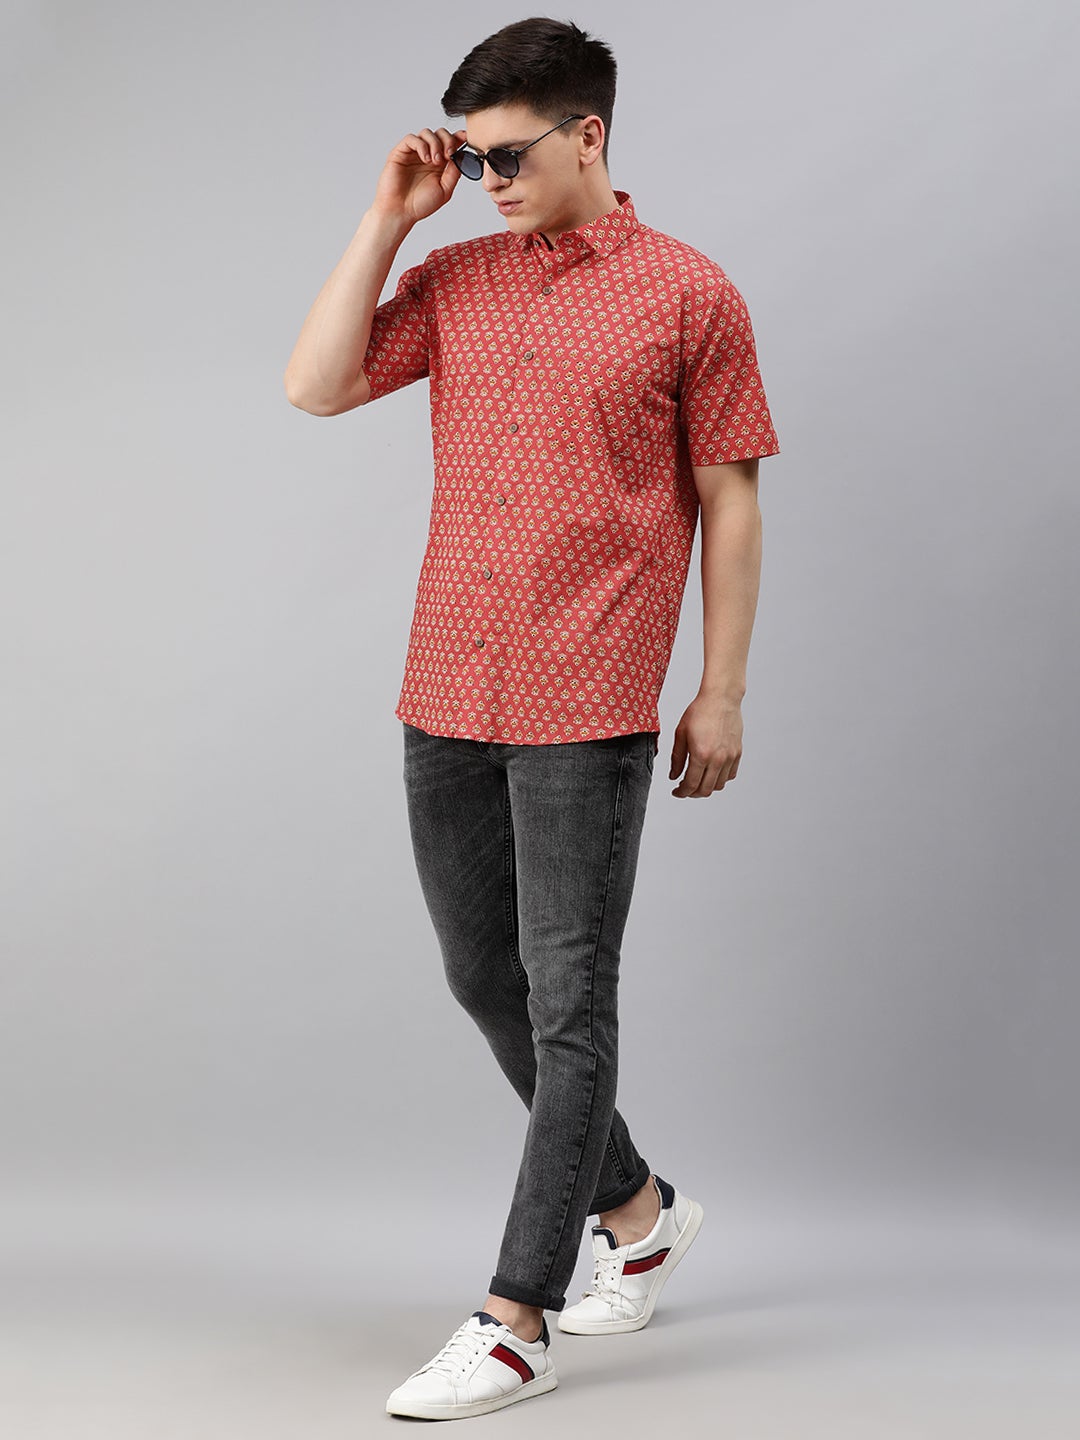 Red Cotton Short Sleeves Shirts For Men